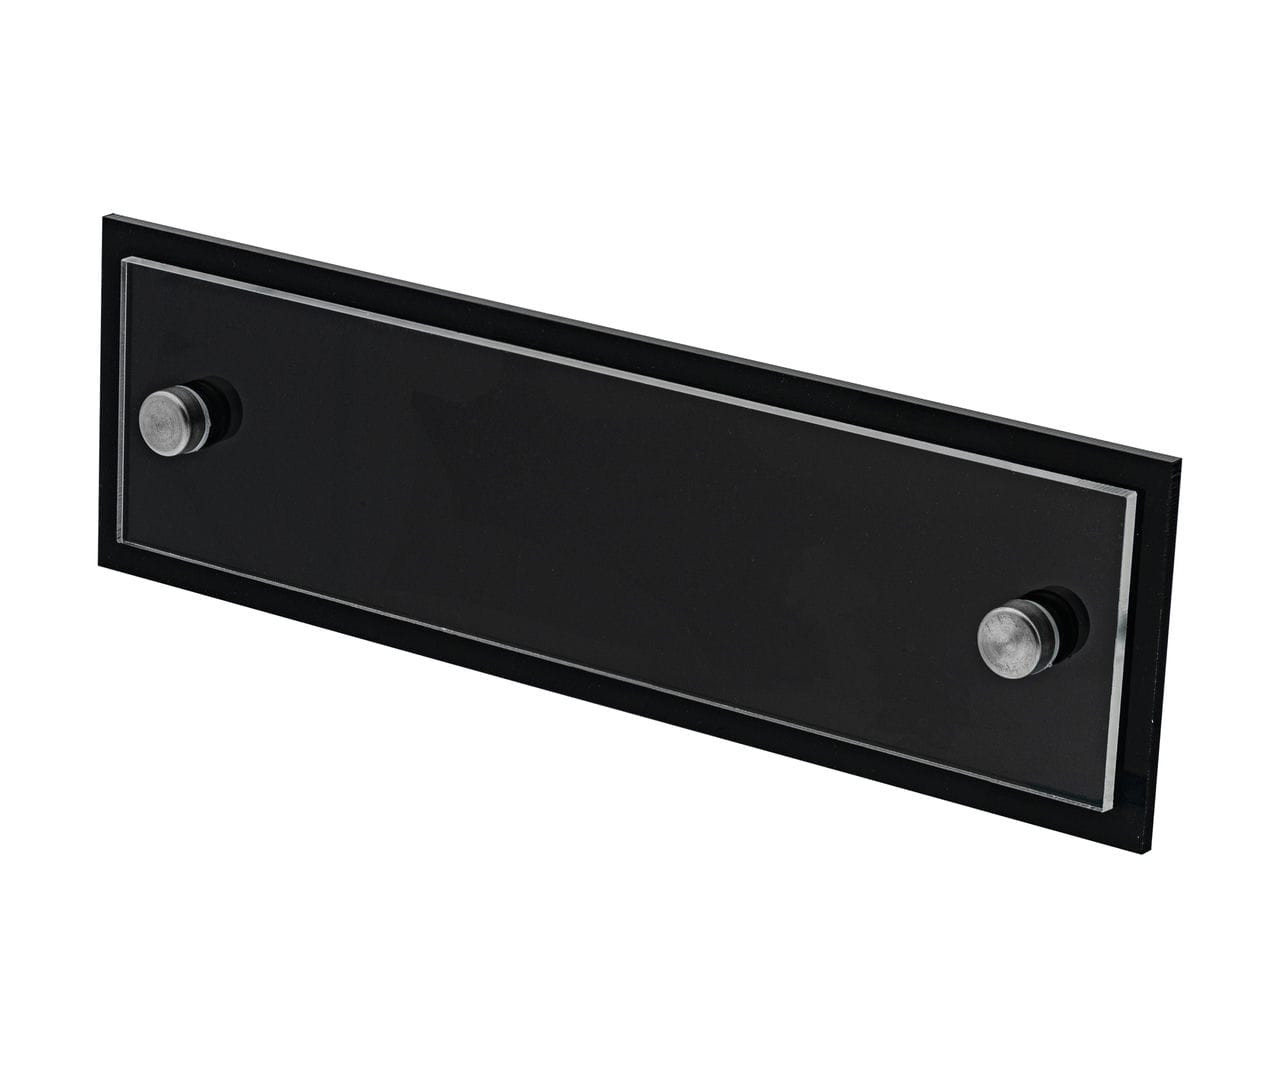 Sign Standoff Screw for Wall Mount Sign Holders